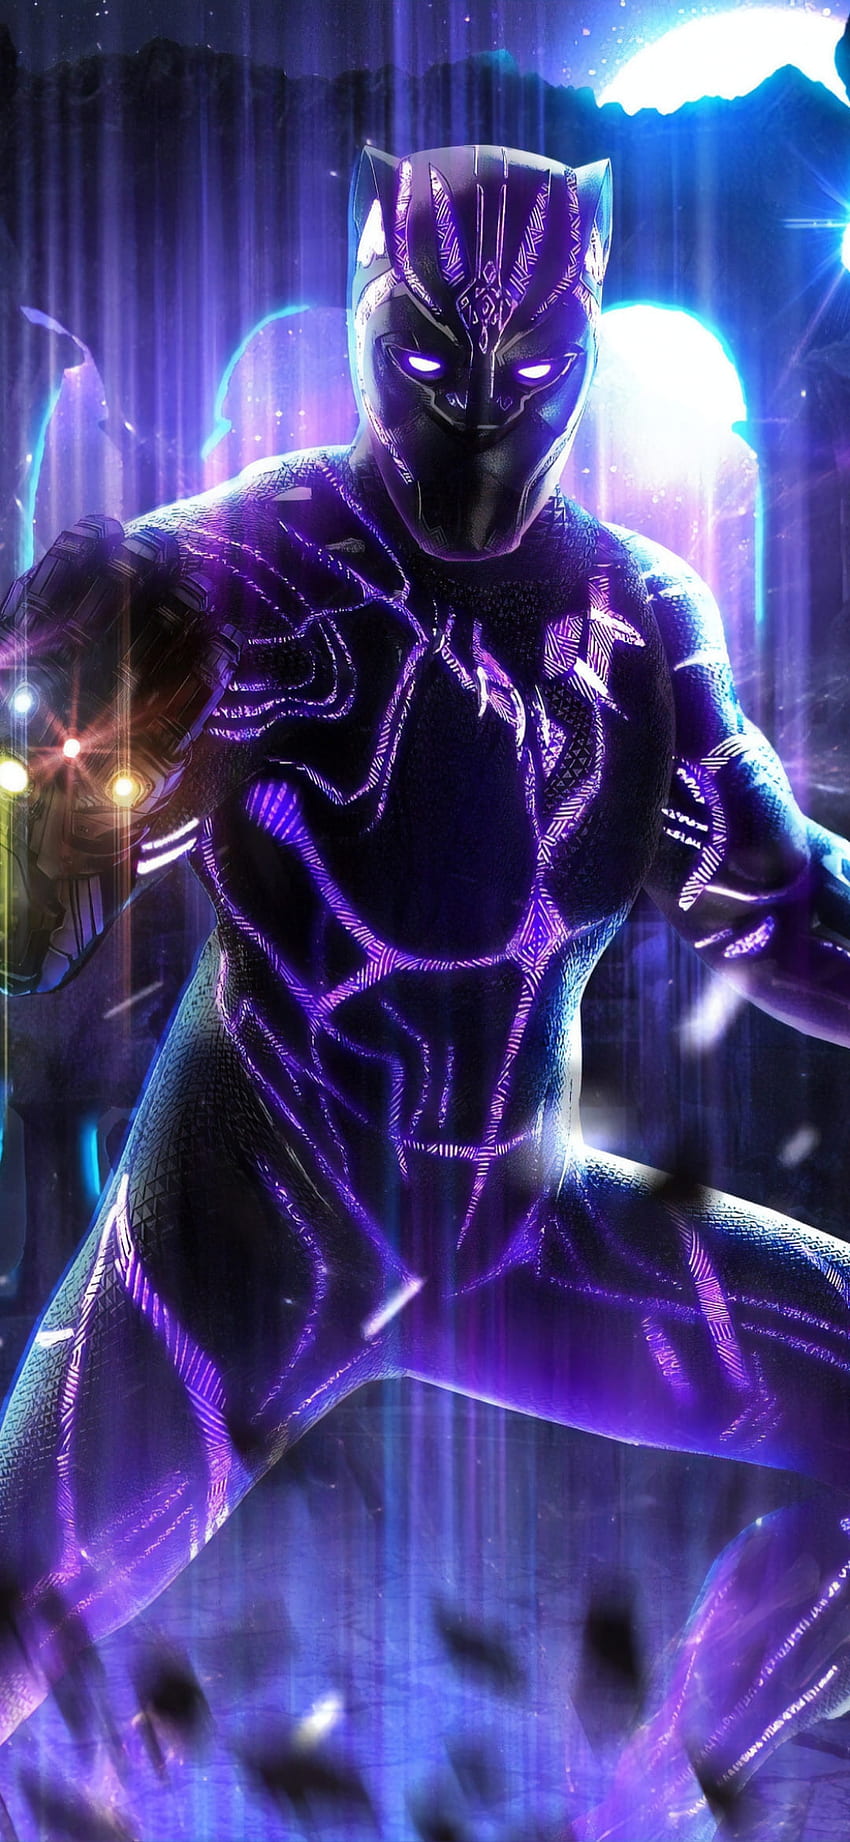 Honour The Spirit Of Wakanda With Marvel Studios Black Panther Wakanda  Forever Wallpapers For Your Mobile And Video Calls  Disney Singapore